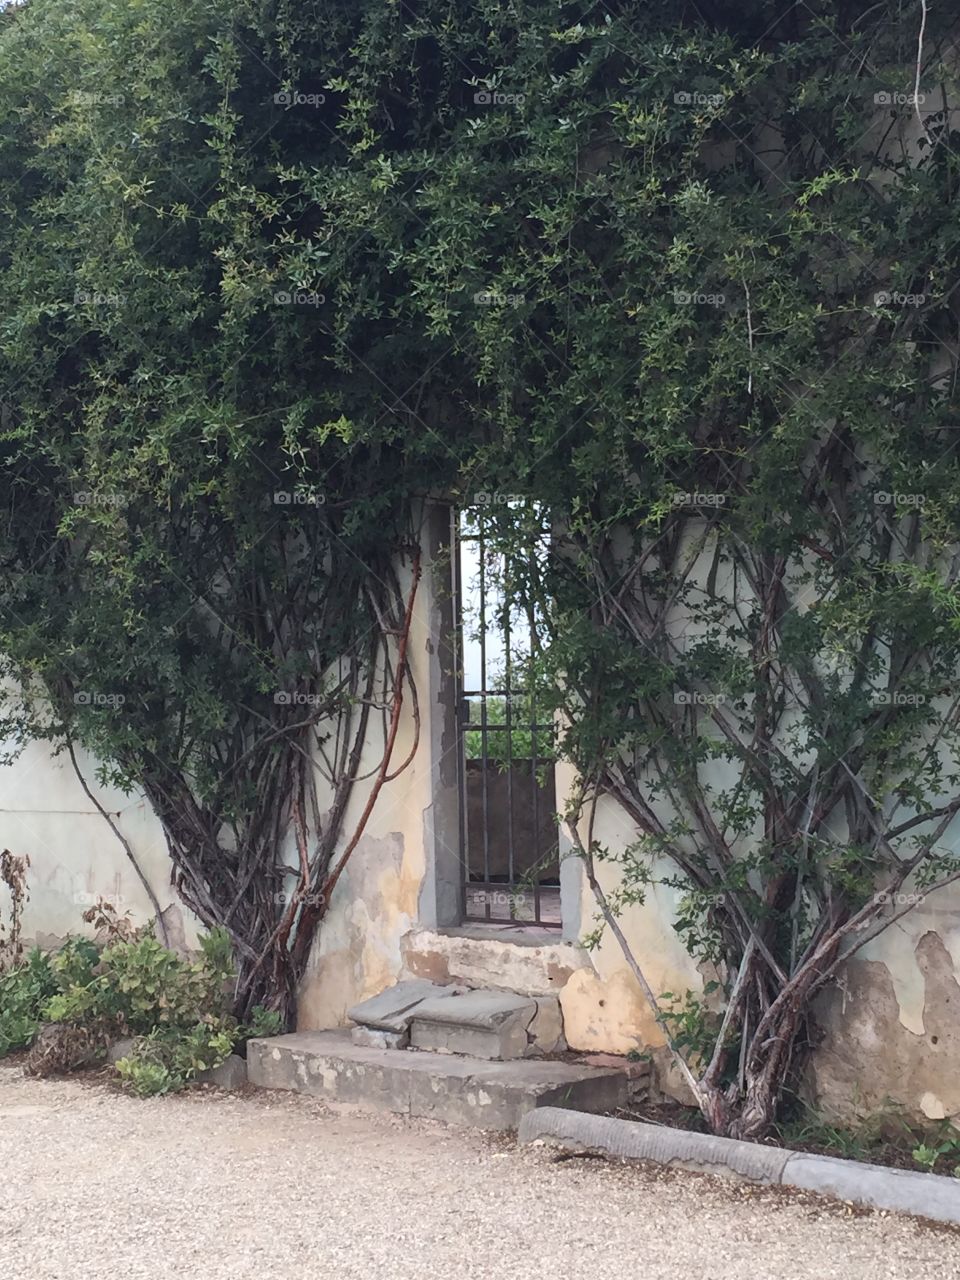 An old door in a garden wall, overgrown with greenery. The door is made of bars and can be seen through. It is closed.